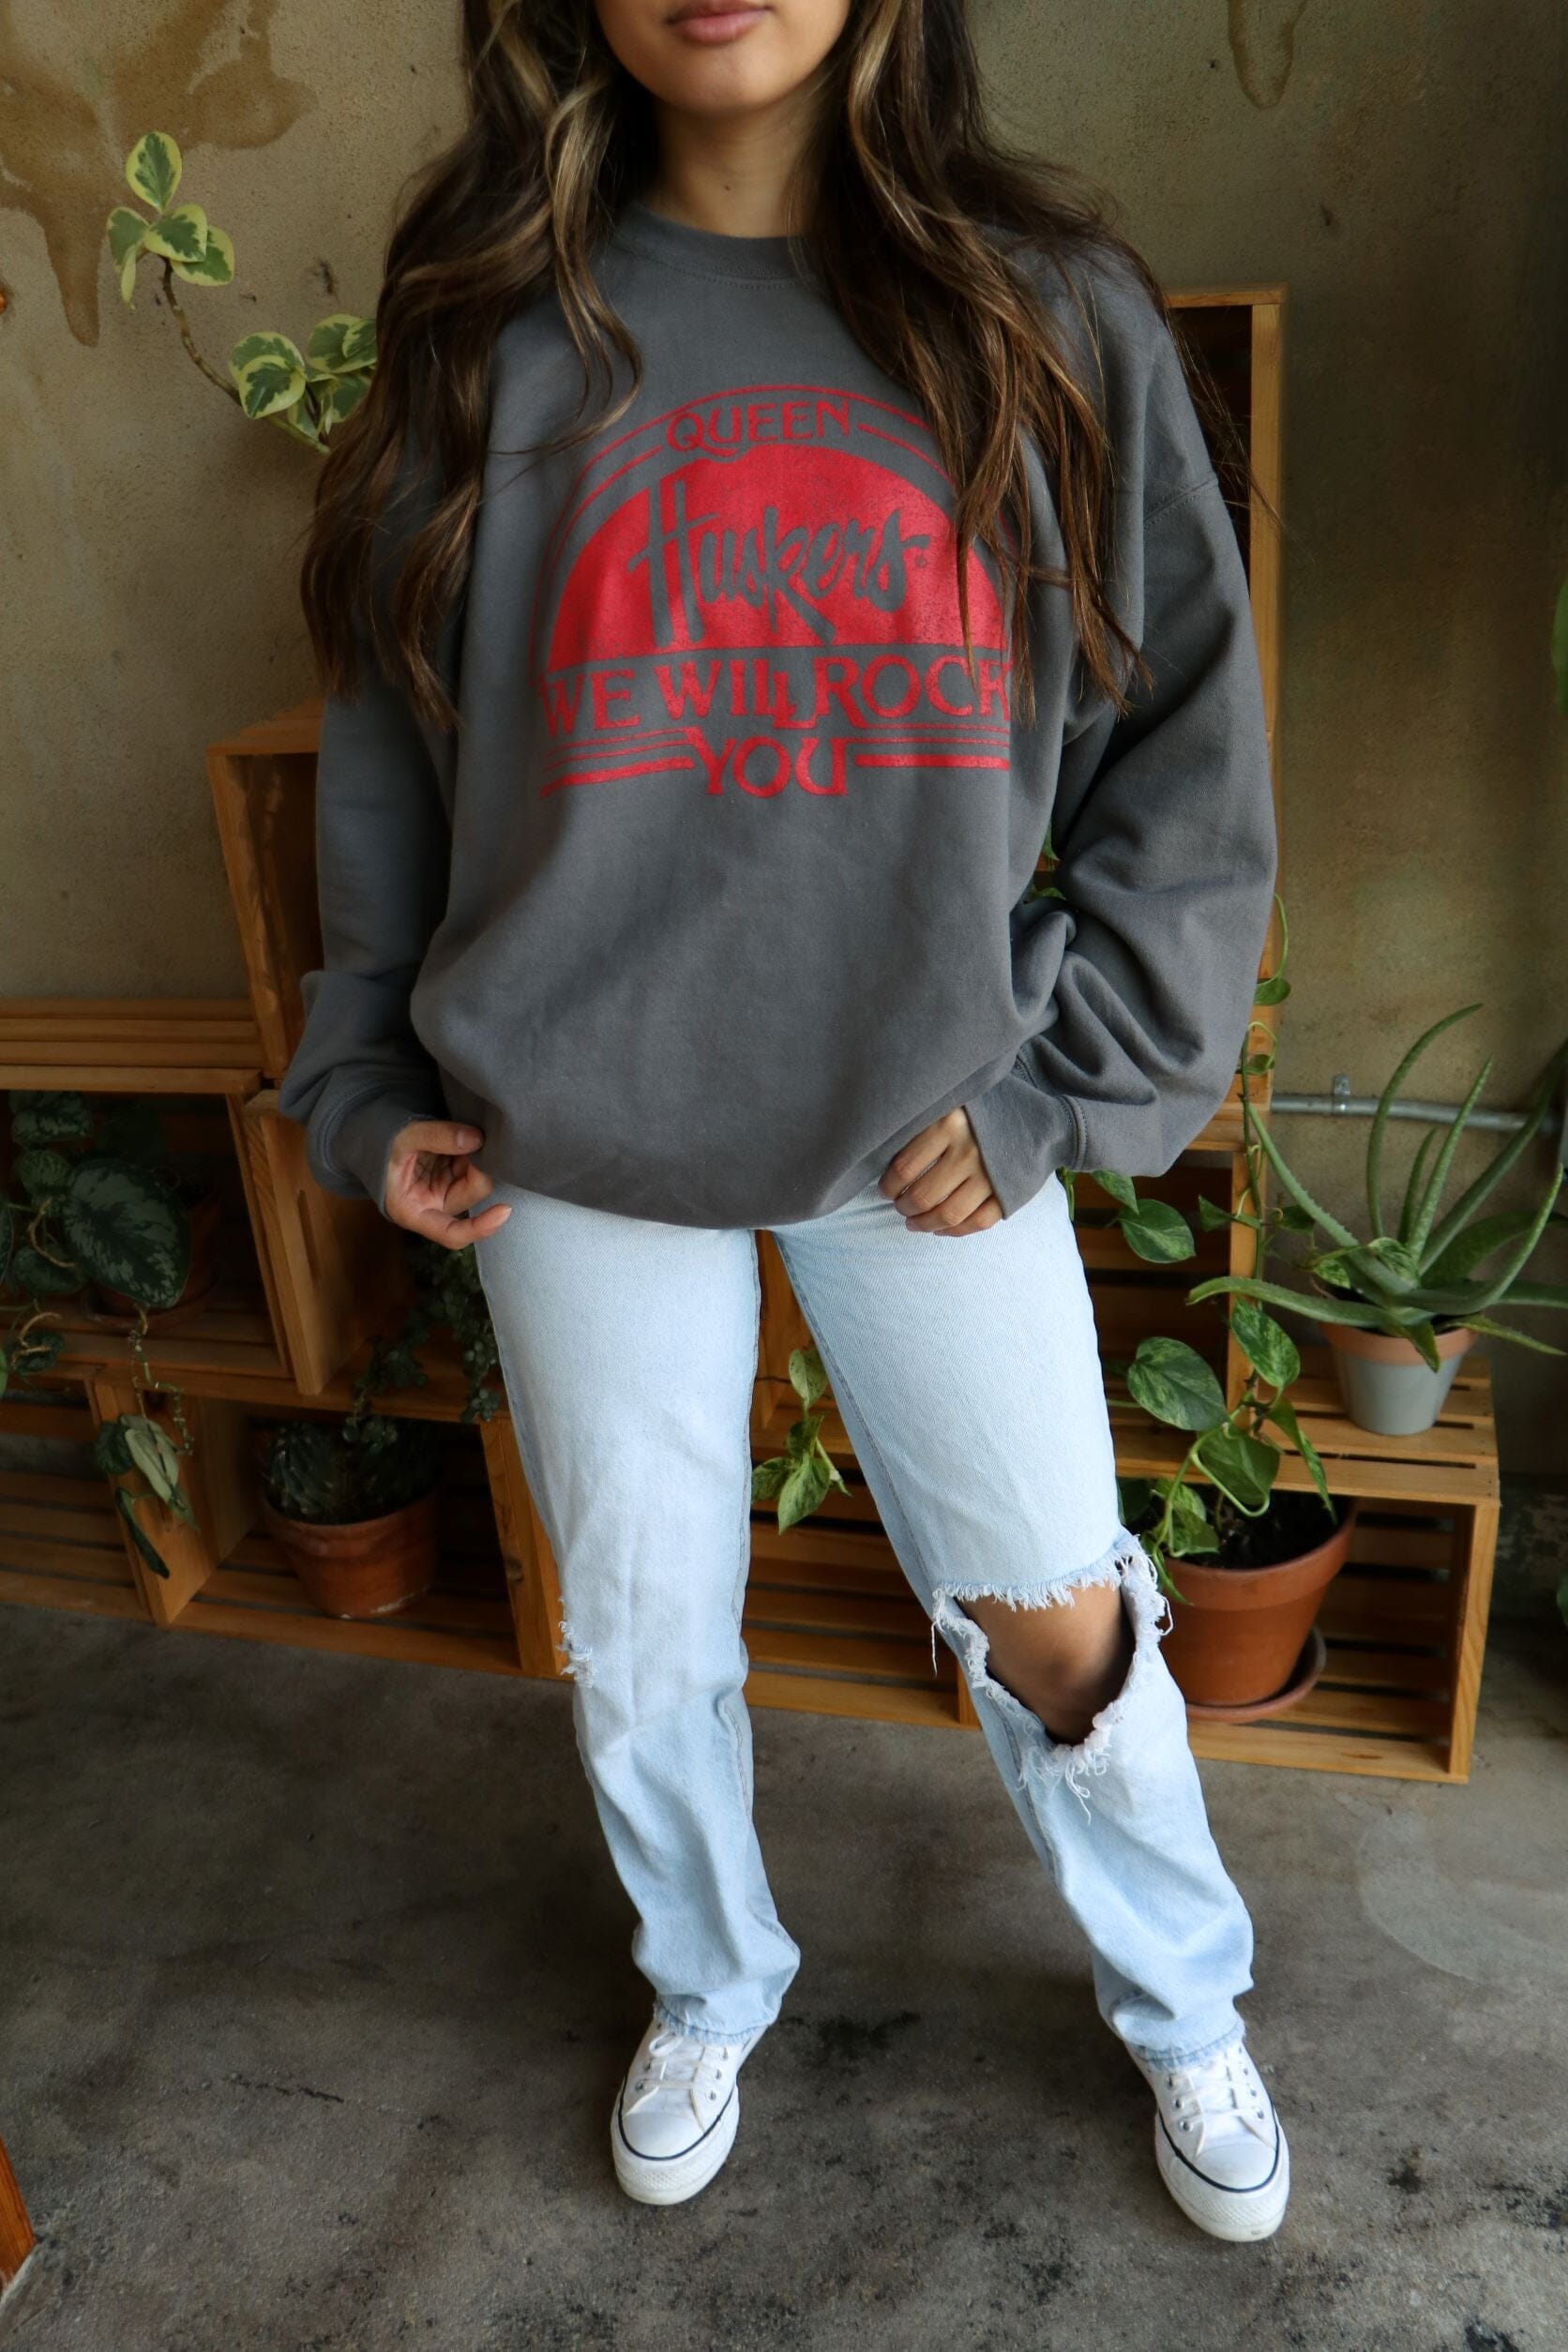 Queen Huskers Will Rock You Charcoal Thrifted Sweatshirt